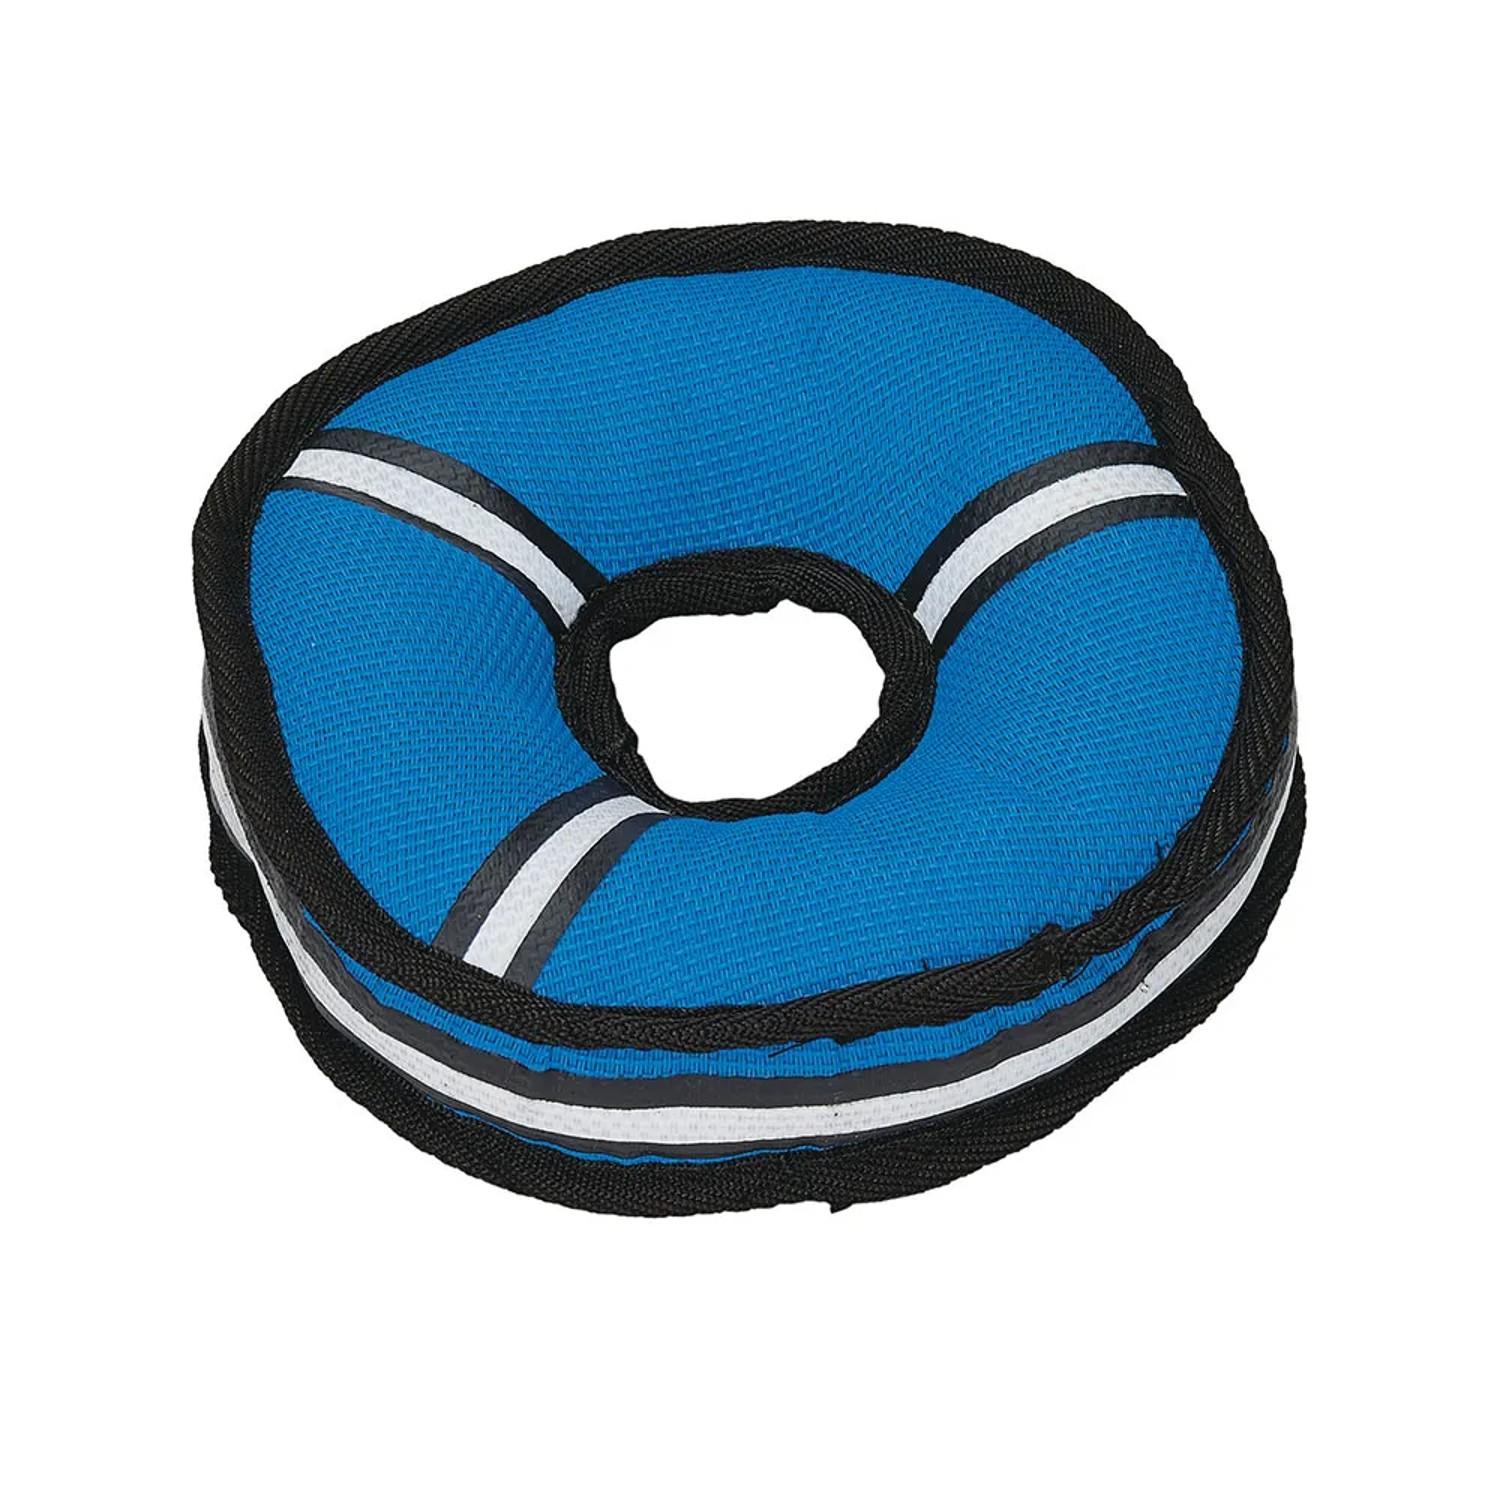 Zanies Toughstructable Toss Dog Toy - Blue Ring